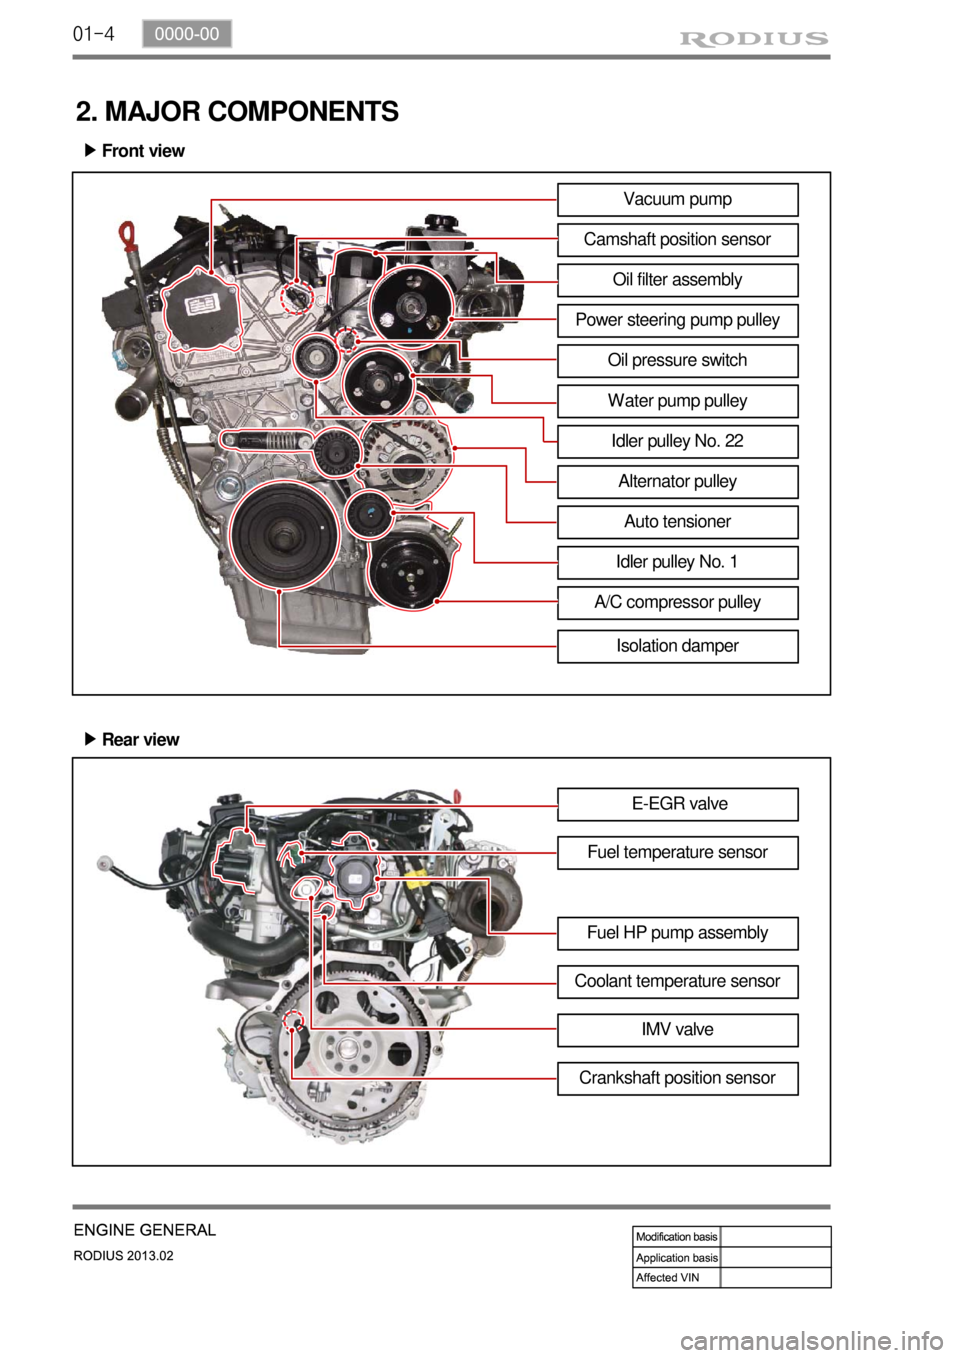 SSANGYONG TURISMO 2013  Service Manual 01-4
2. MAJOR COMPONENTS
Front view ▶
Vacuum pump
Camshaft position sensor
Oil filter assembly
Power steering pump pulley
Oil pressure switch
Water pump pulley
Idler pulley No. 22
Alternator pulley
